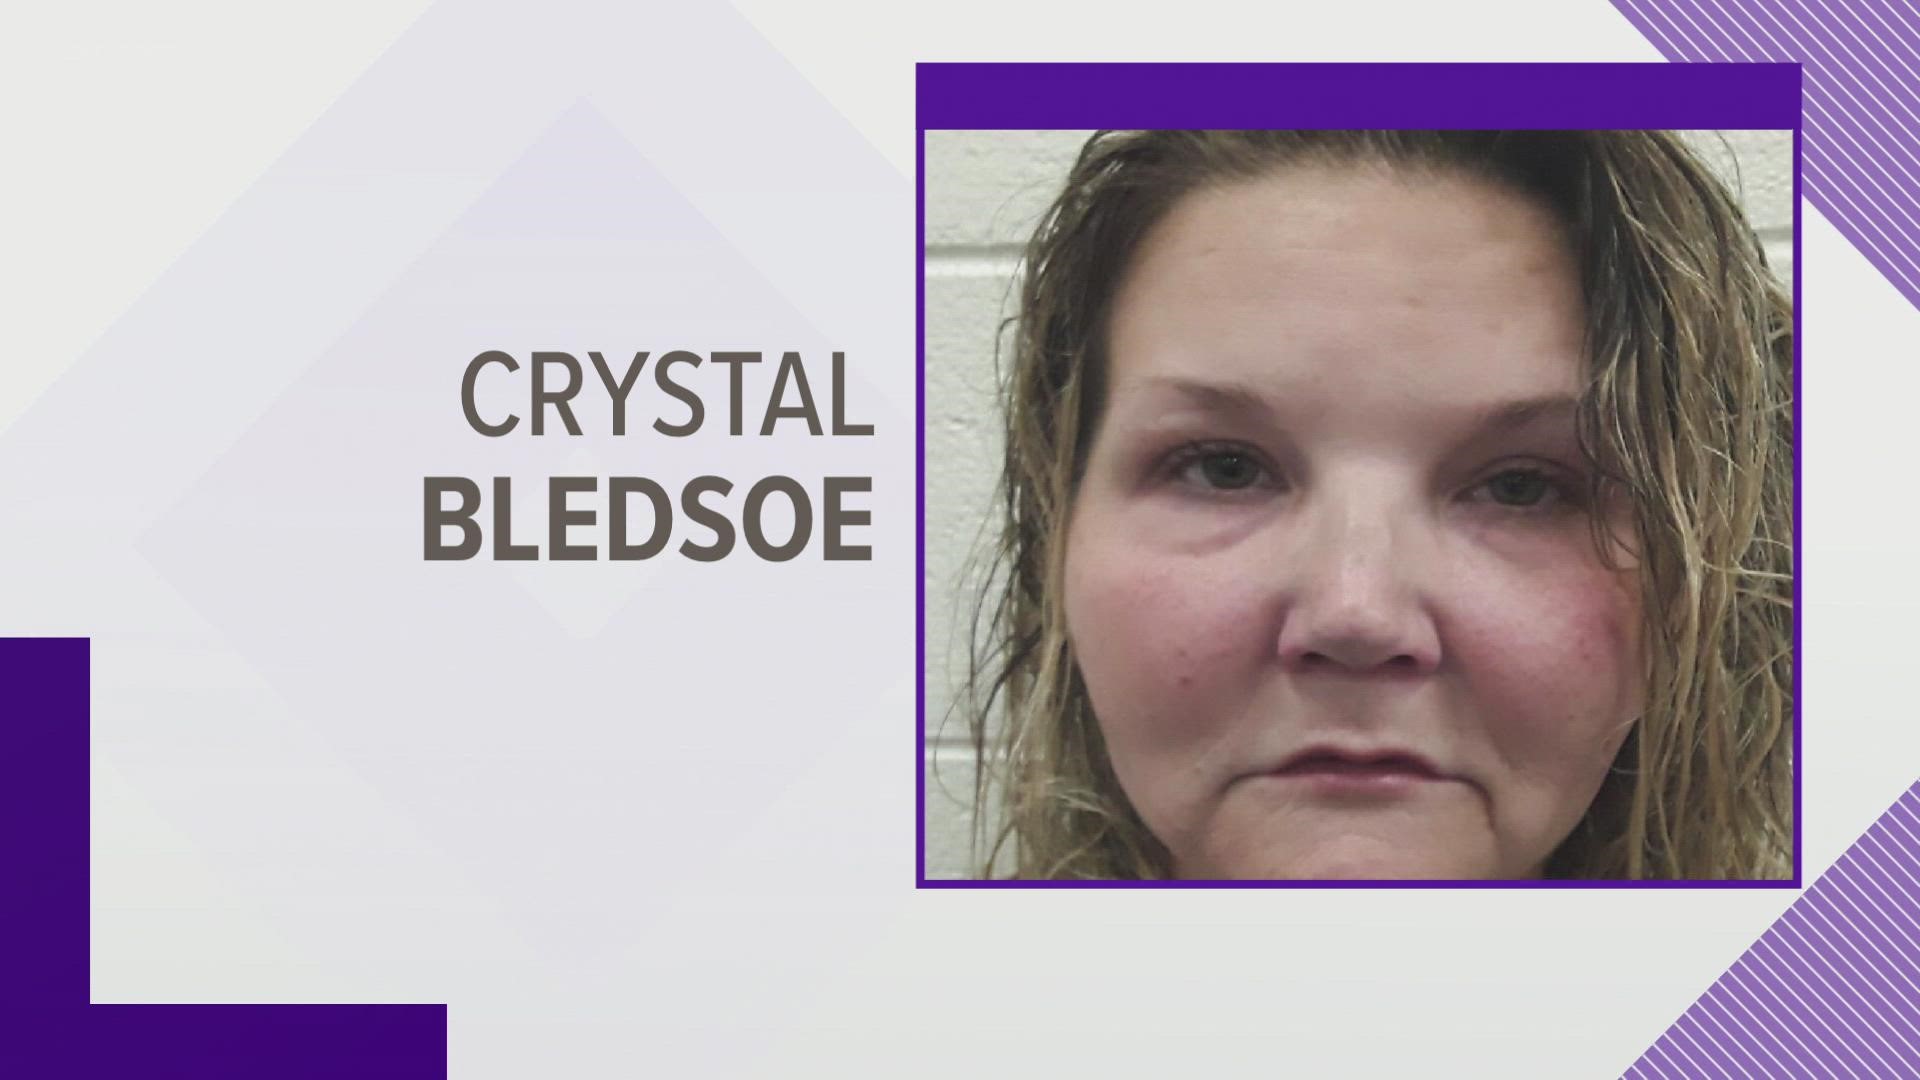 The arrest report said Bledsoe initially told deputies the boyfriend had been hit by a round that came from the woods behind her, but later admitted to shooting him.